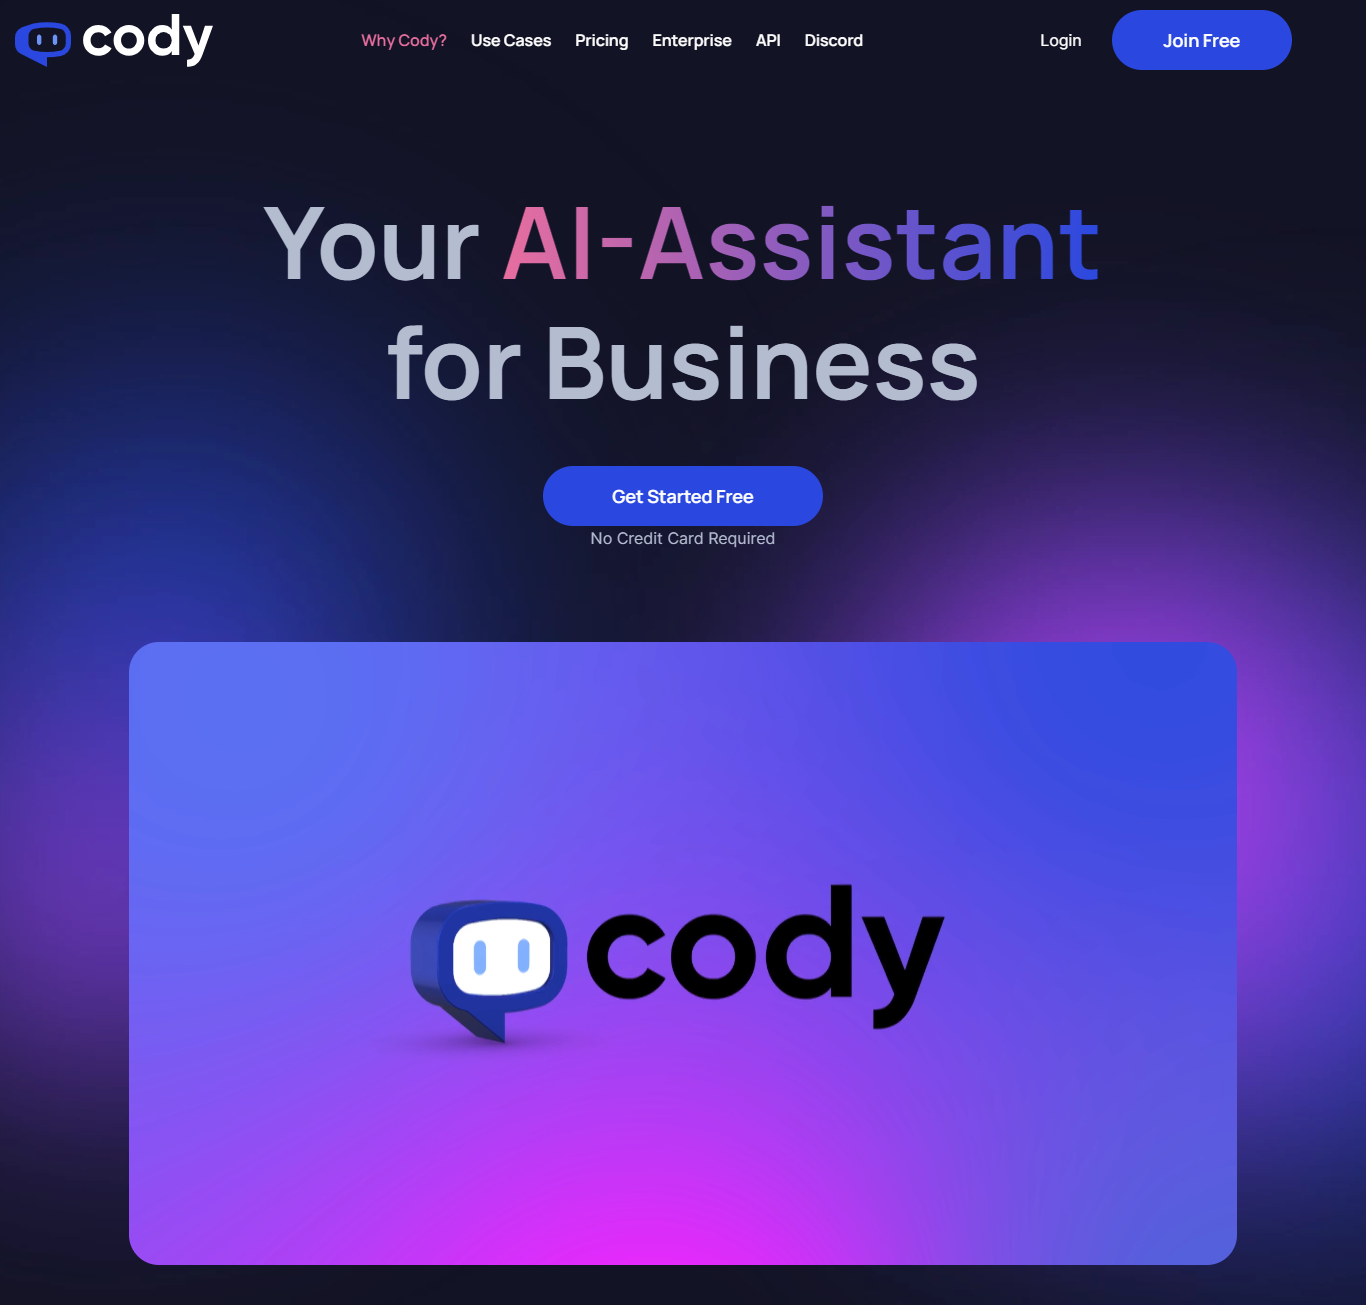 cody, ai, 2023, ai tool, ai assistant, use cody, chatgpt, productivity, ai assistant like, troubleshoot, knowledge base, instant answers, brainstorm, brainstorm ideas, troubleshoot issues, creative work, customer support, translate documents, marketing materials